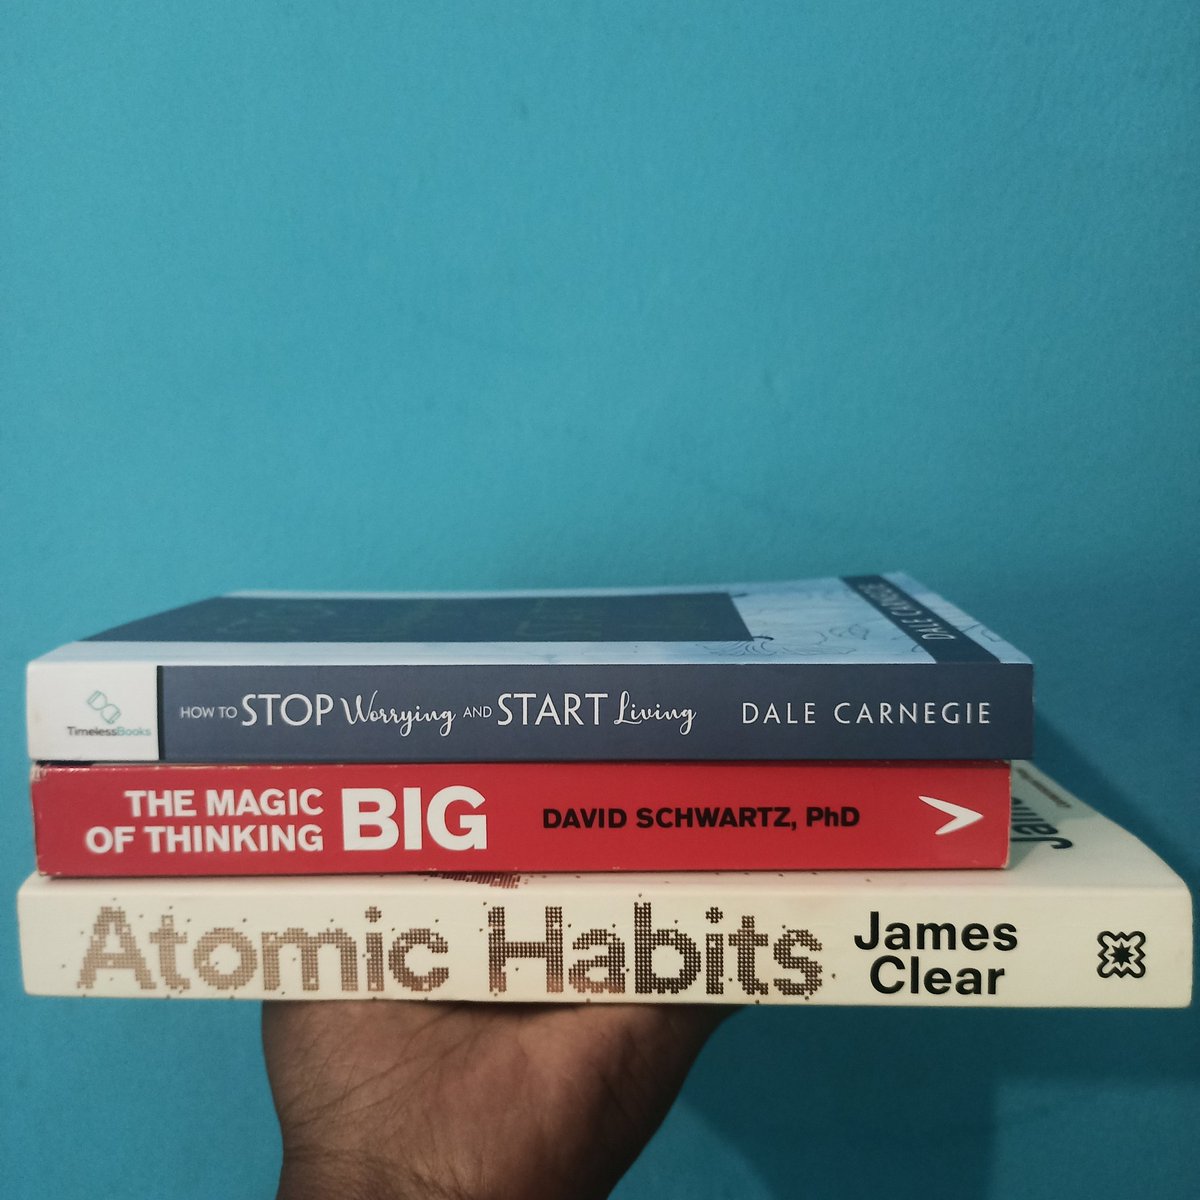 2024 books so far, the plan is to read one book every 2 weeks. So far we are cruising nicely! Finished Atomic Habits, now on book number 2 The magic of thinking big. Book 3 by Dale Carnegie is already on standby #corporatefarmgirl